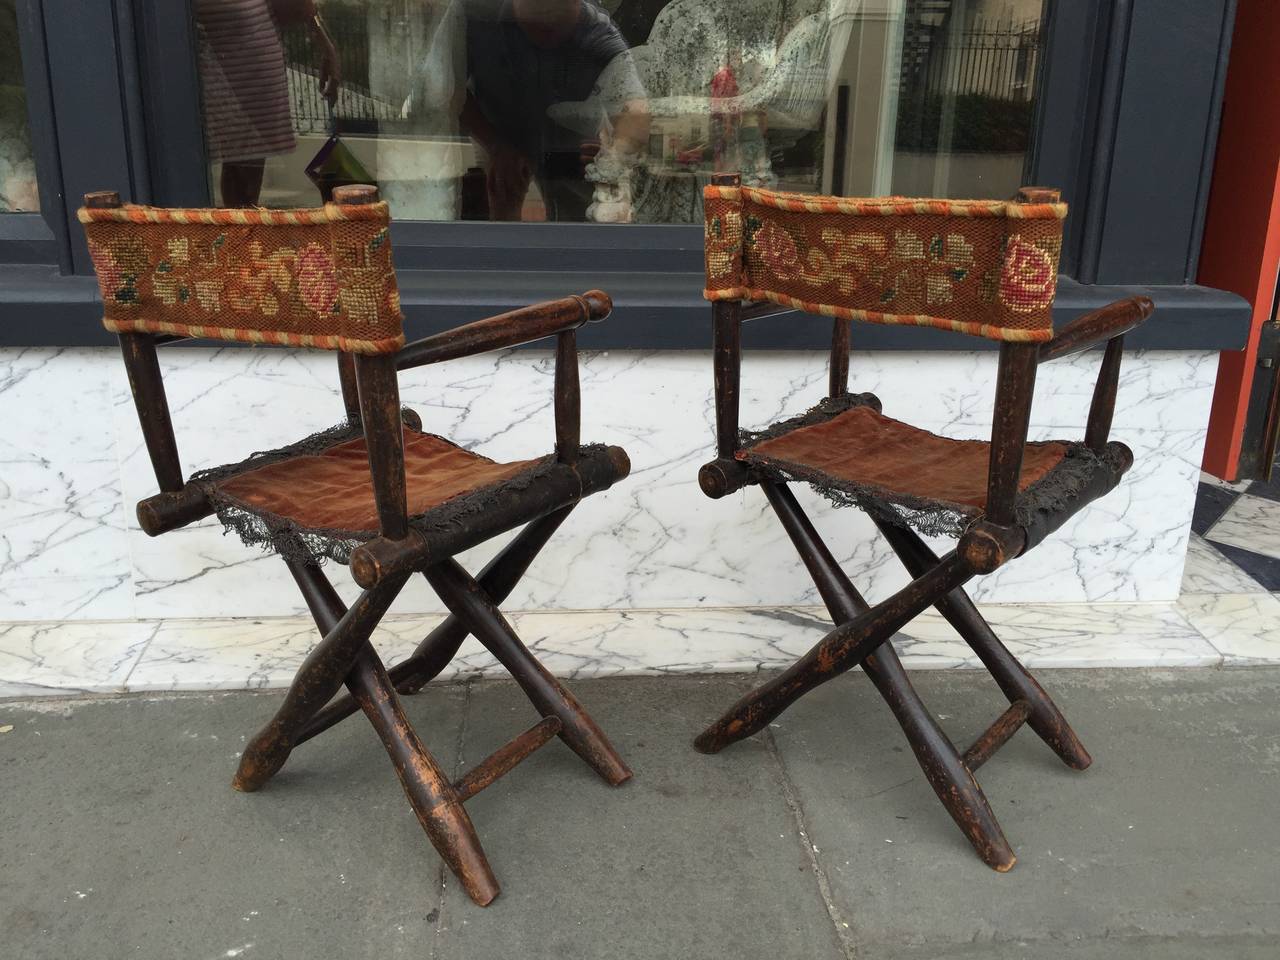 American Pair of Miniature Director's Chairs with Needlework Seat and Back